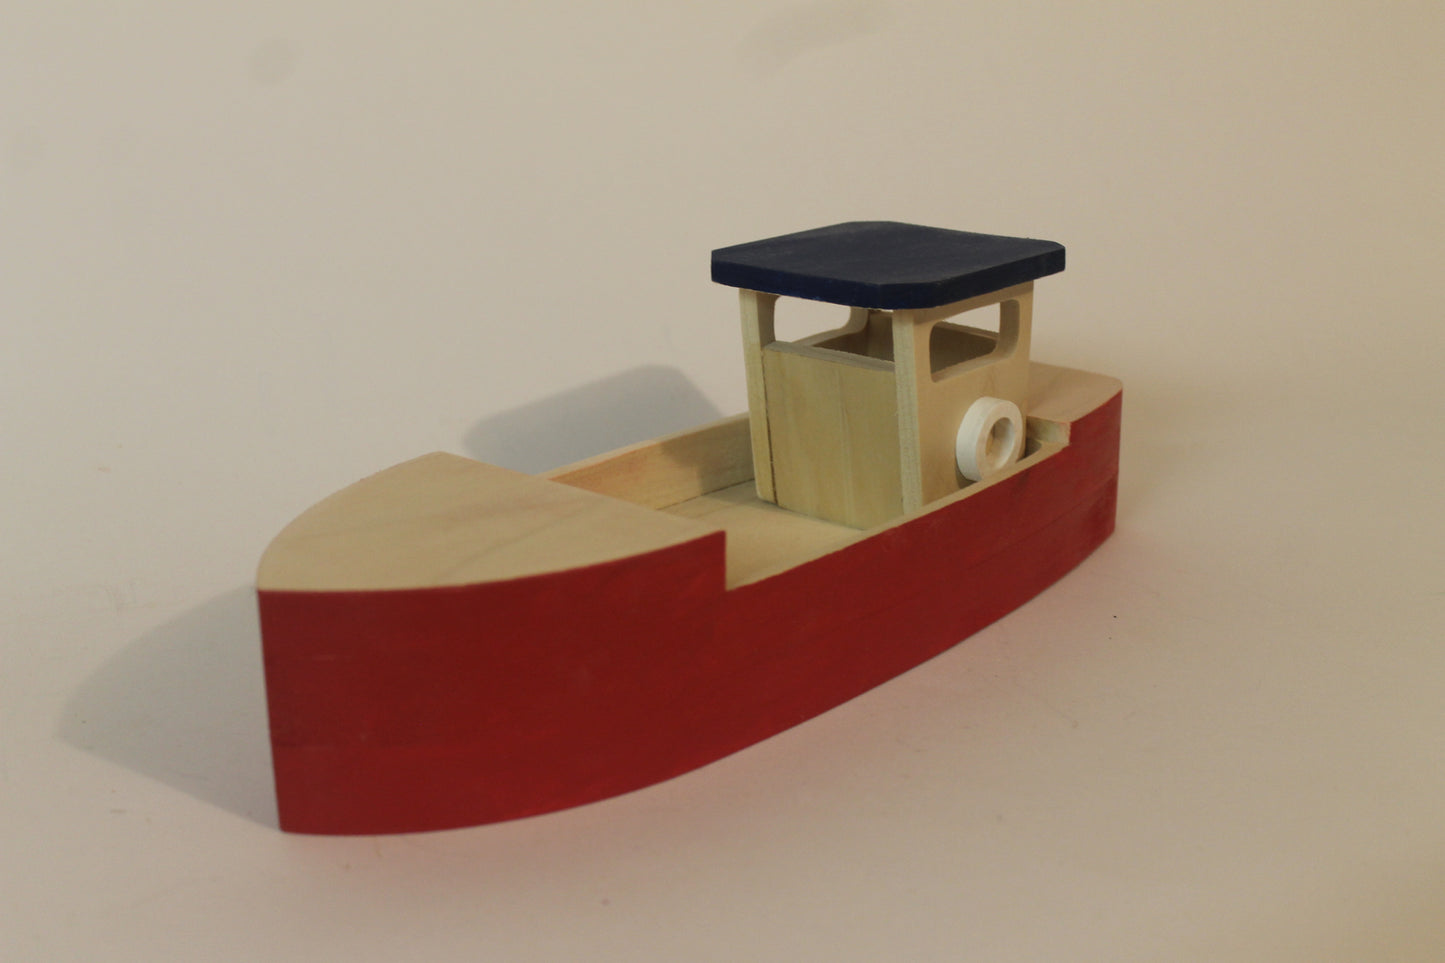 Toy wood fishing boat for indoor play, not made to float – Bob's